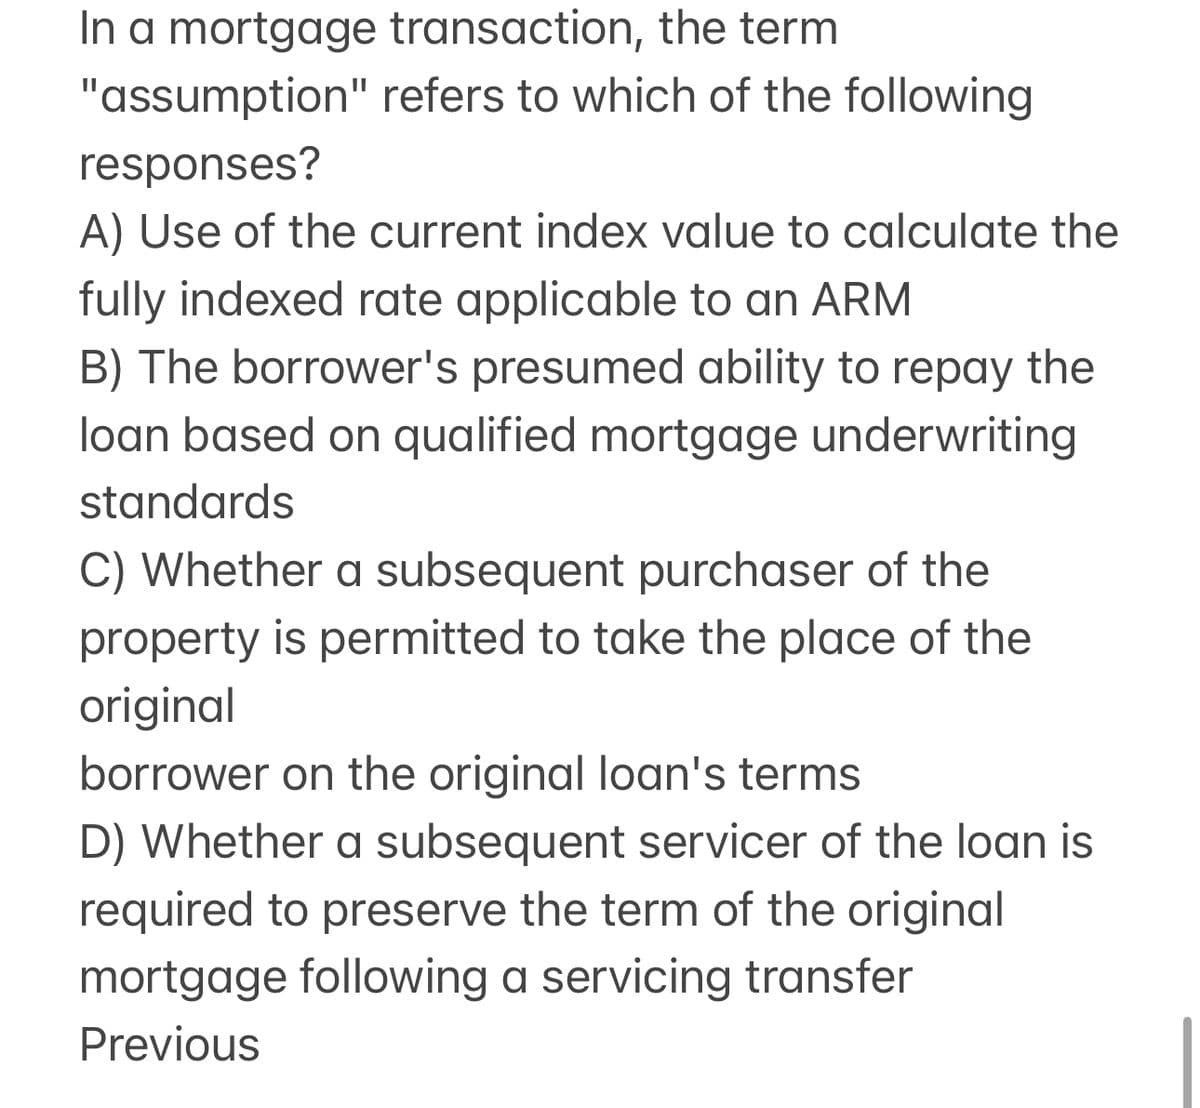 In a mortgage transaction, the term
"assumption" refers to which of the following
responses?
A) Use of the current index value to calculate the
fully indexed rate applicable to an ARM
B) The borrower's presumed ability to repay the
loan based on qualified mortgage underwriting
standards
C) Whether a subsequent purchaser of the
property is permitted to take the place of the
original
borrower on the original loan's terms
D) Whether a subsequent servicer of the loan is
required to preserve the term of the original
mortgage following a servicing transfer
Previous